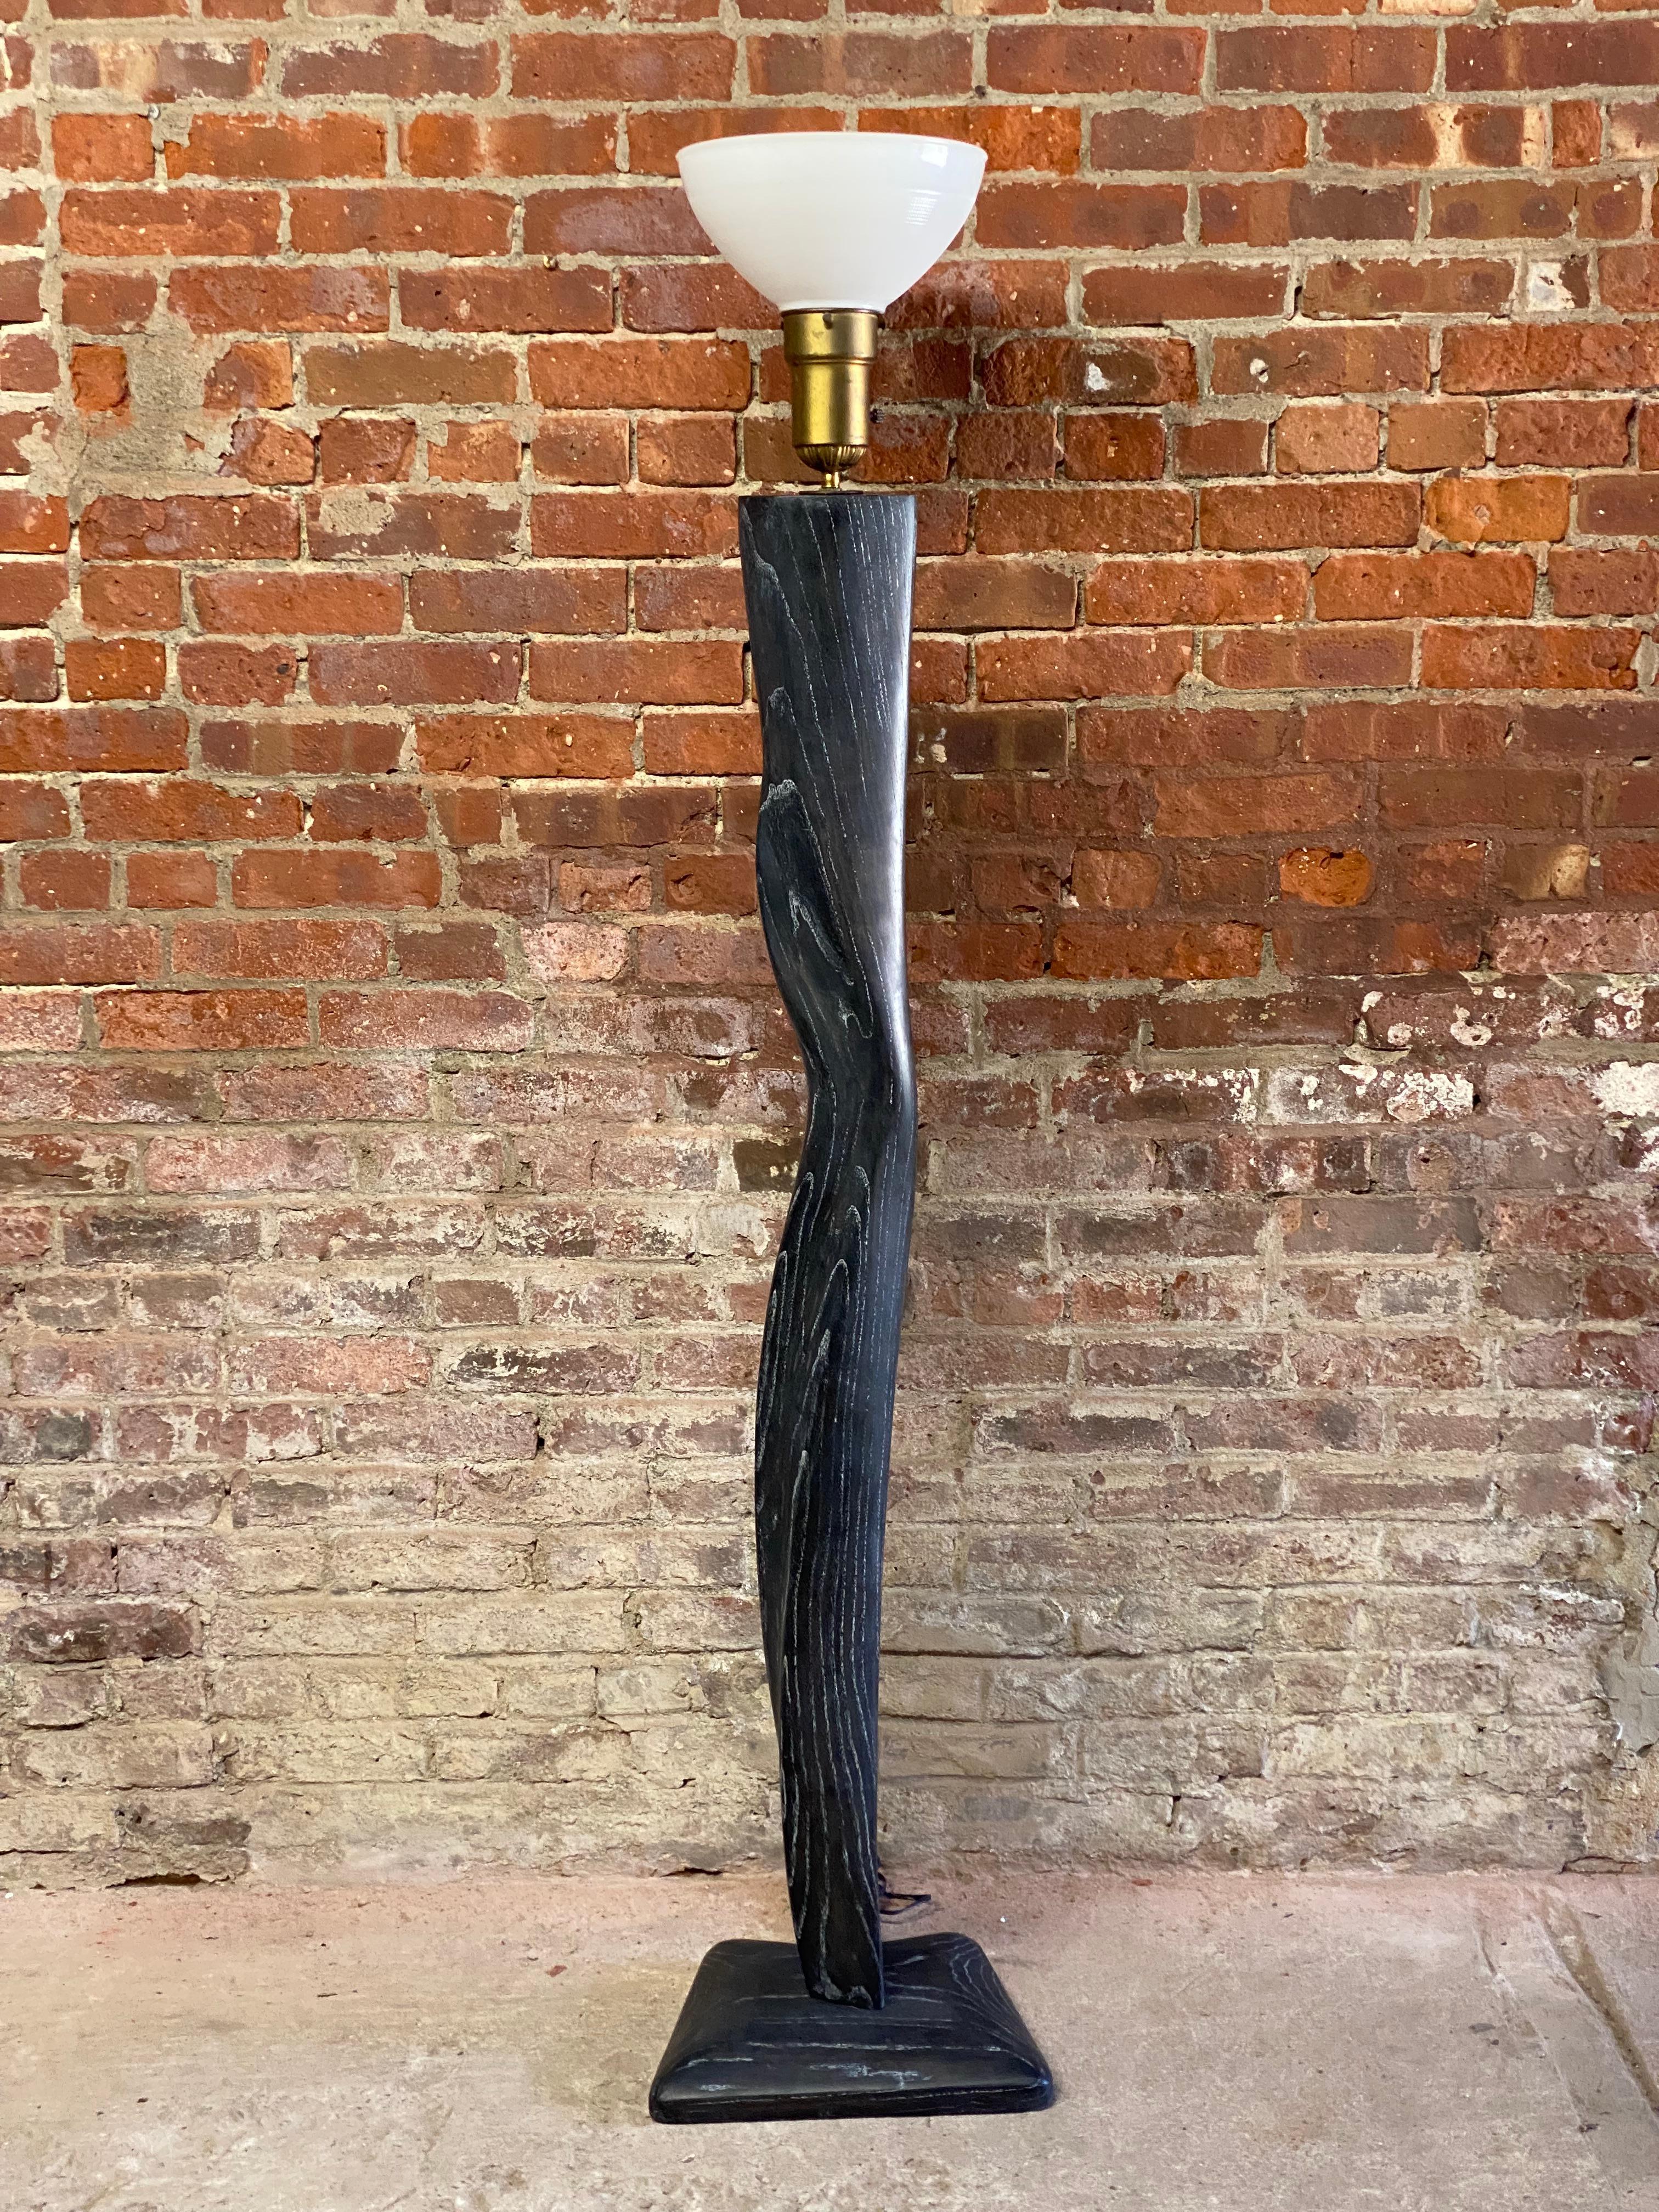 Ebonized and limed oak Heifetz floor lamp. Sensual and curvy oak shaft and base with milk glass diffuser. Circa 1950. Rewired and room ready. New ceramic socket.

Good overall condition with minor wear and light scratches. 

Approximate overall